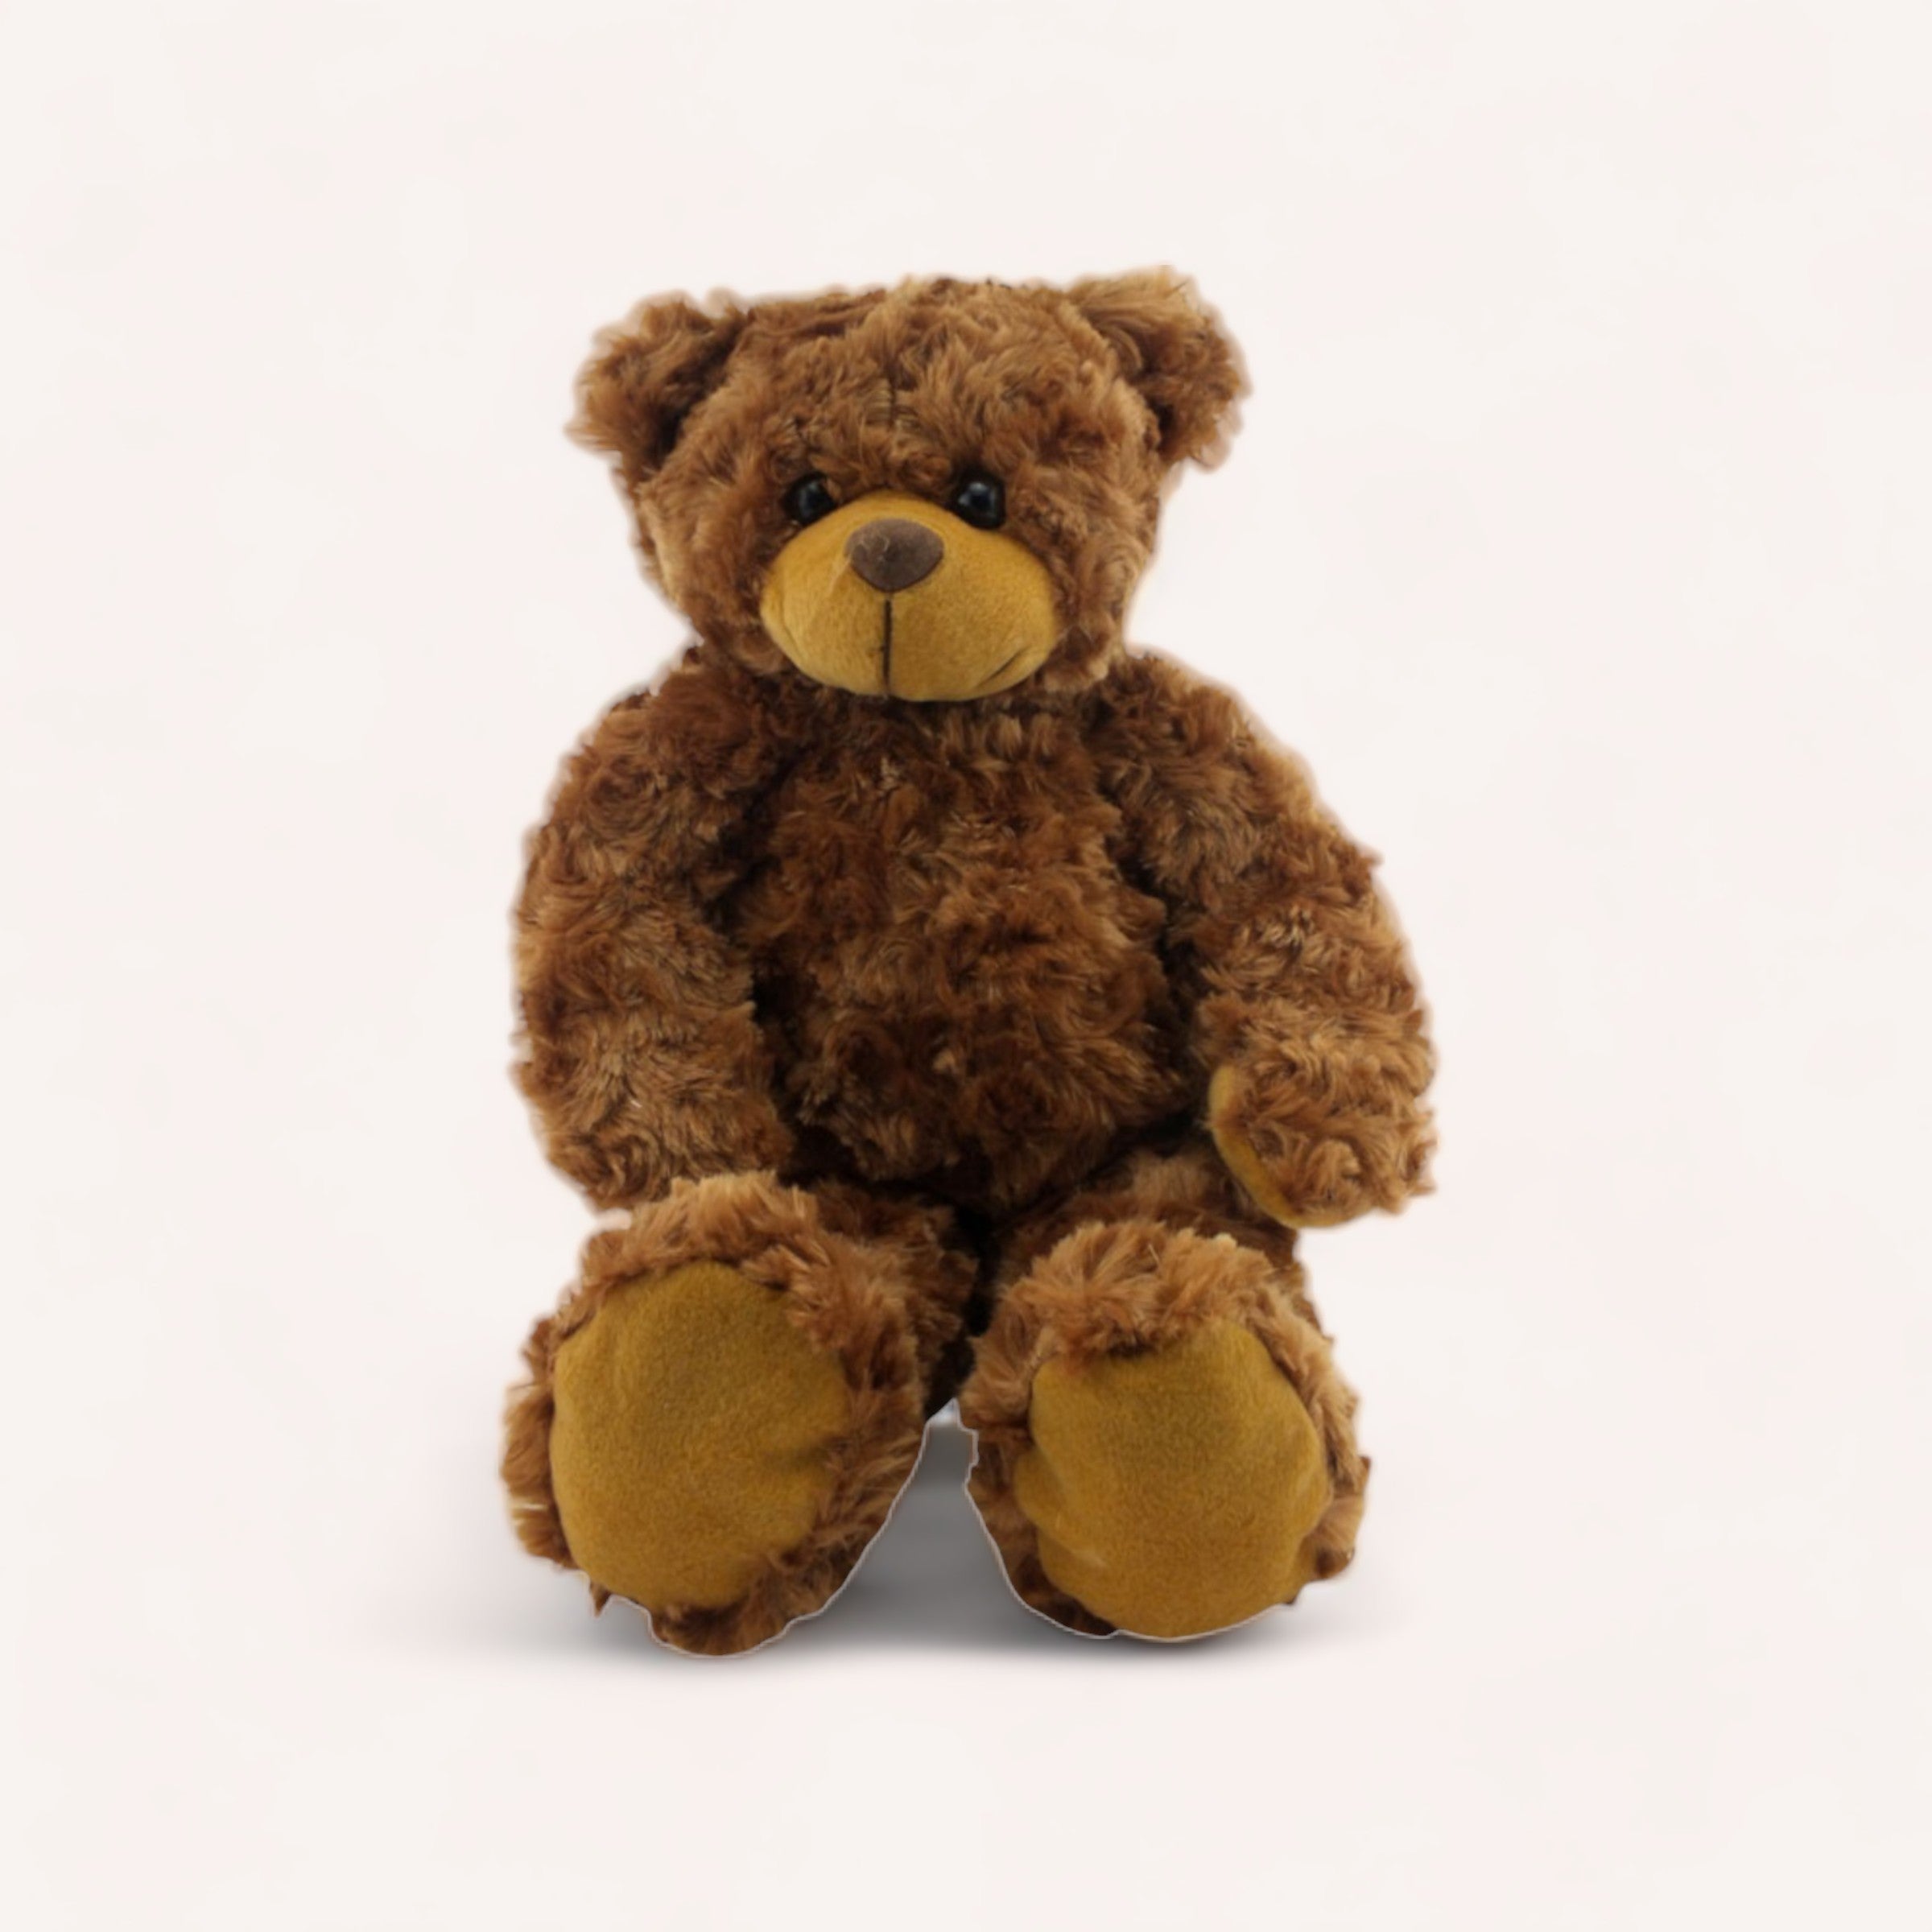 A cuddly charm, fluffy brown Harrison Bear sitting against a plain white background from The Teddy Factory.